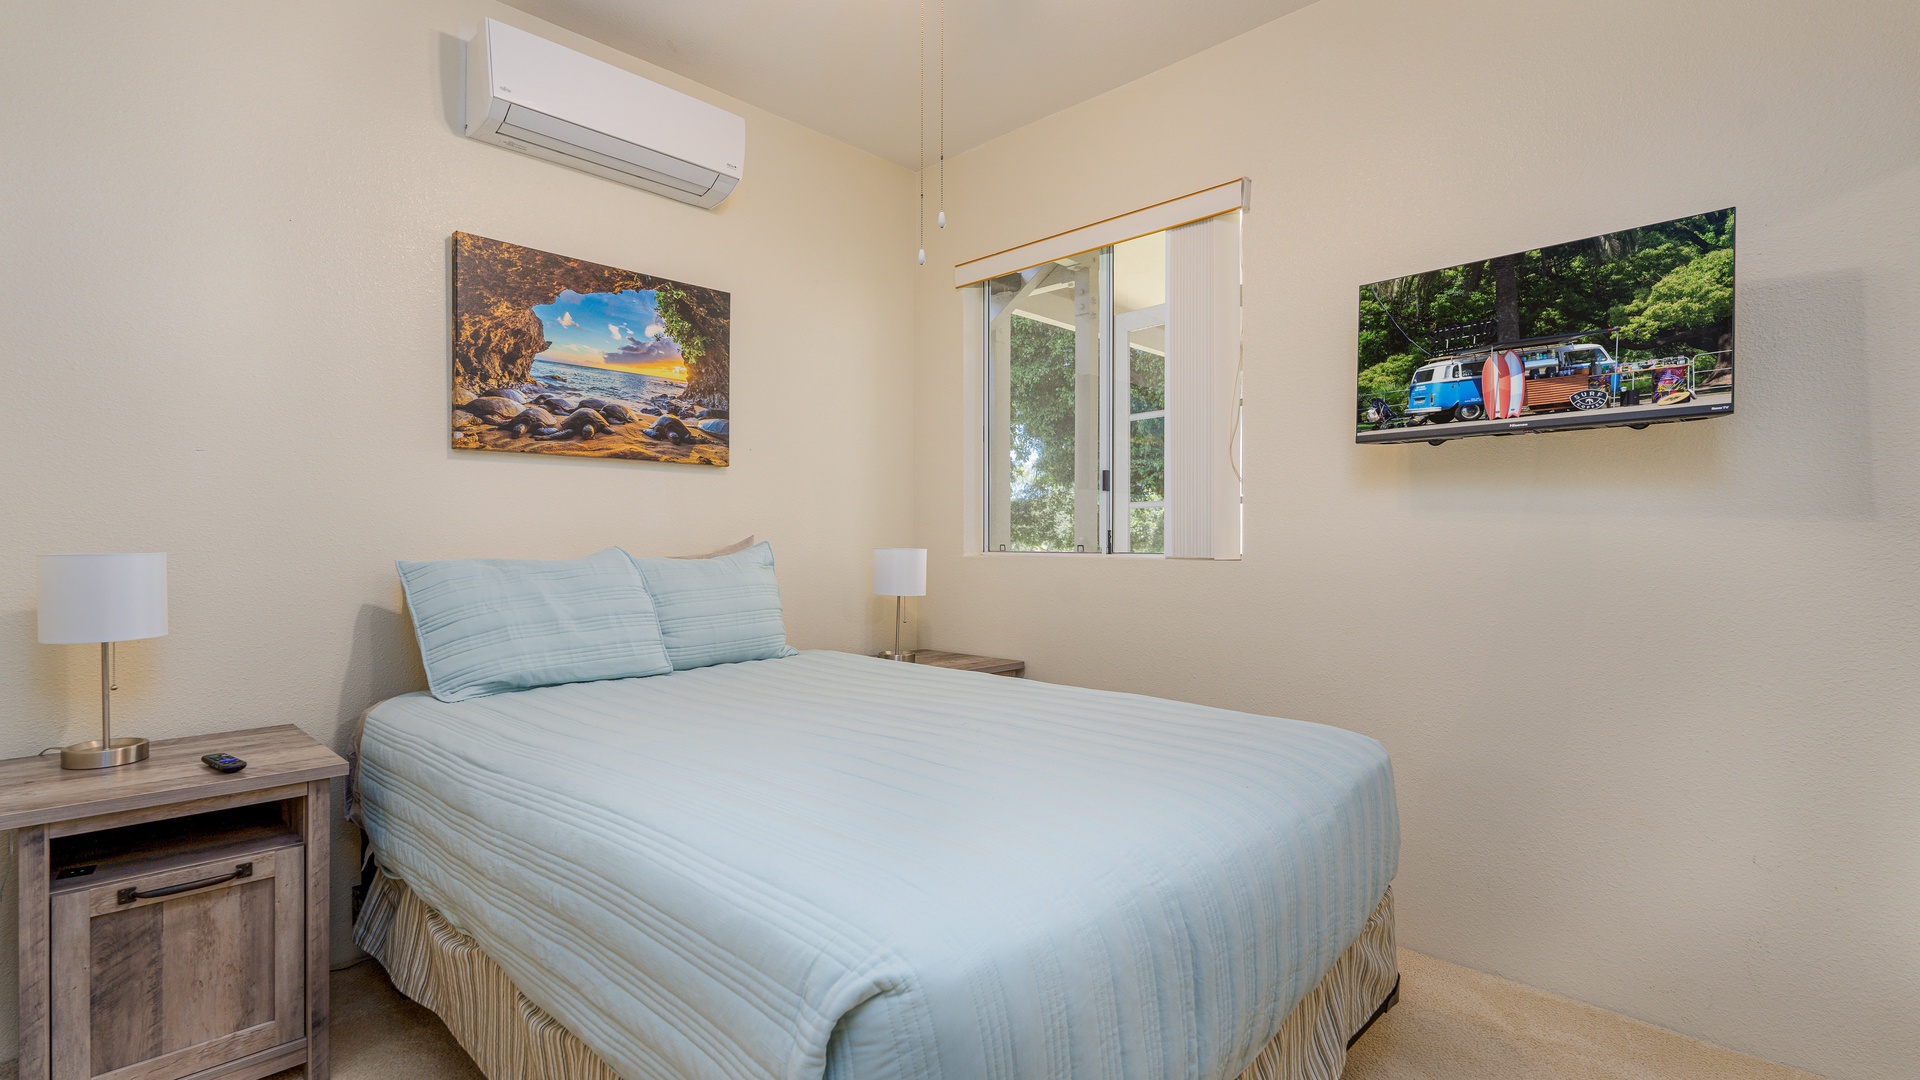 Kapolei Vacation Rentals, Fairways at Ko Olina 18C - The second guest bedroom is well appointed with soft linens and tropical art.